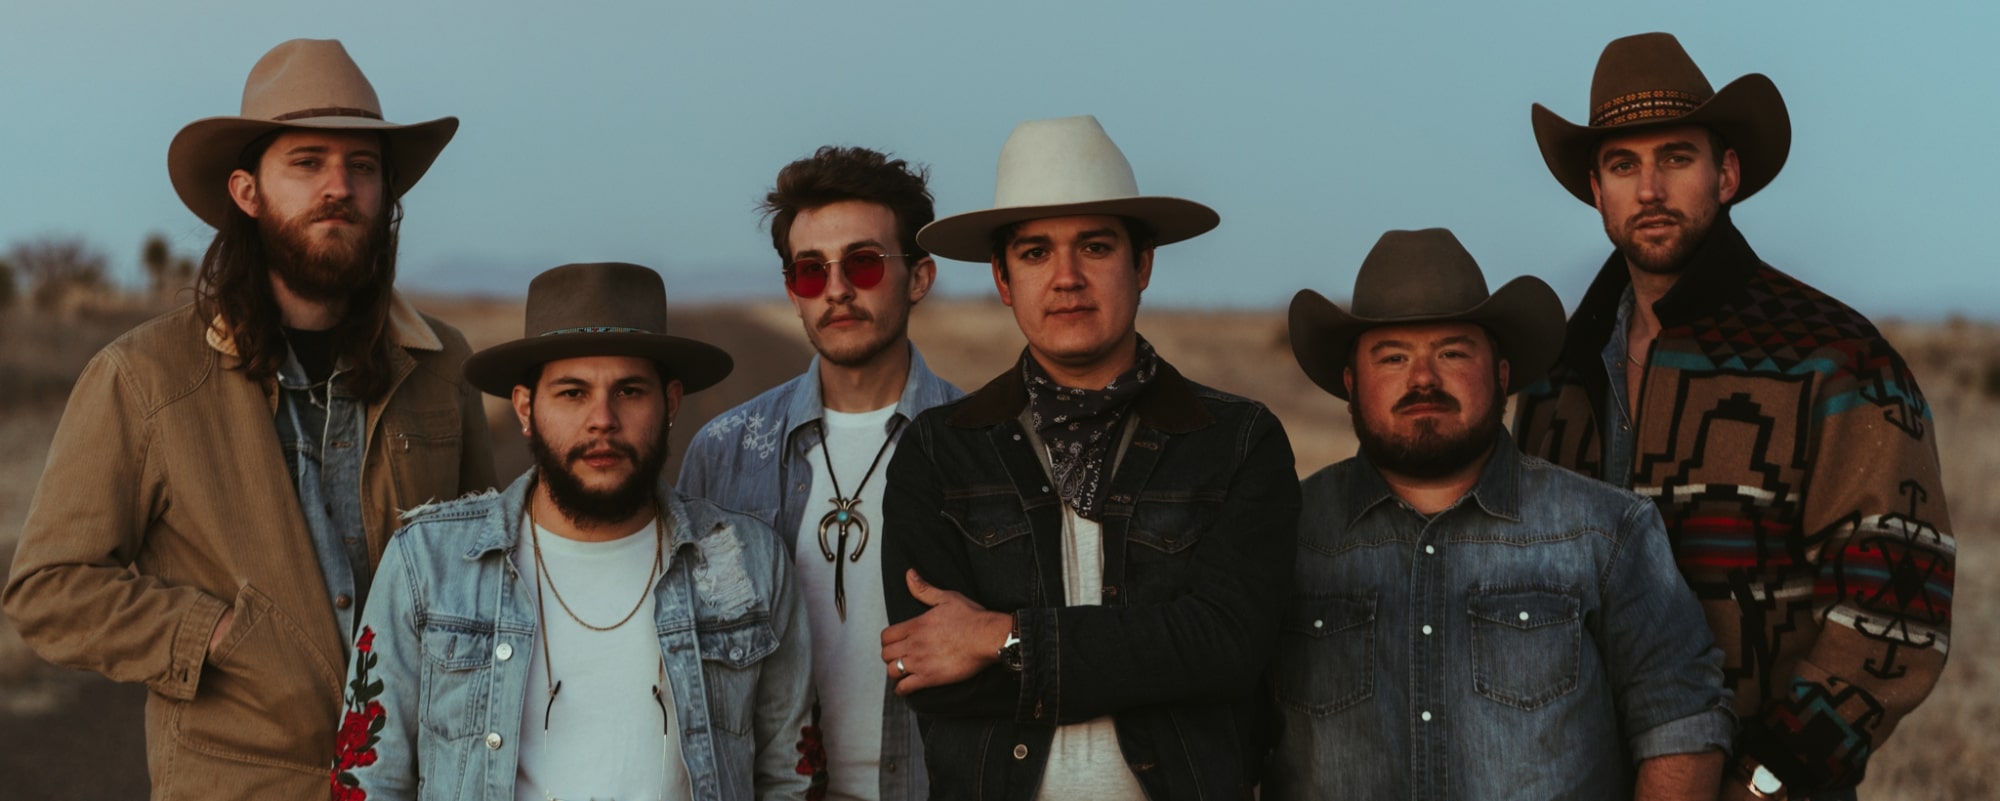 Cleto Cordero Reflects on Flatland Cavalry’s First ACM Nomination, Their Sold-Out Ryman Auditorium Debut, and More